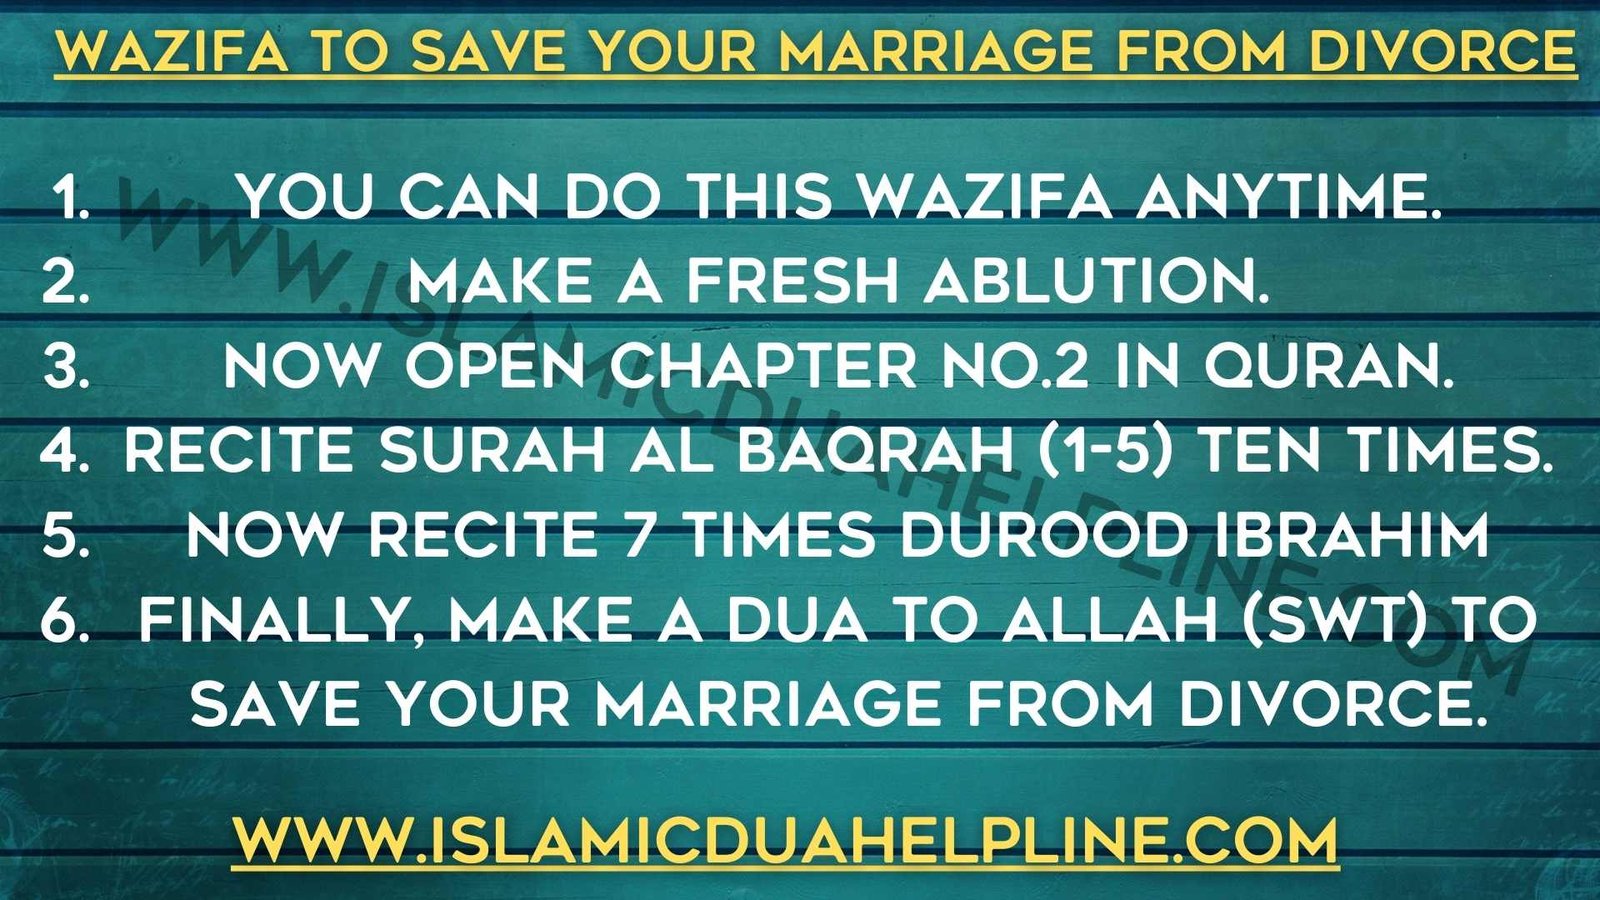 Wazifa to Save Your Marriage From Divorce